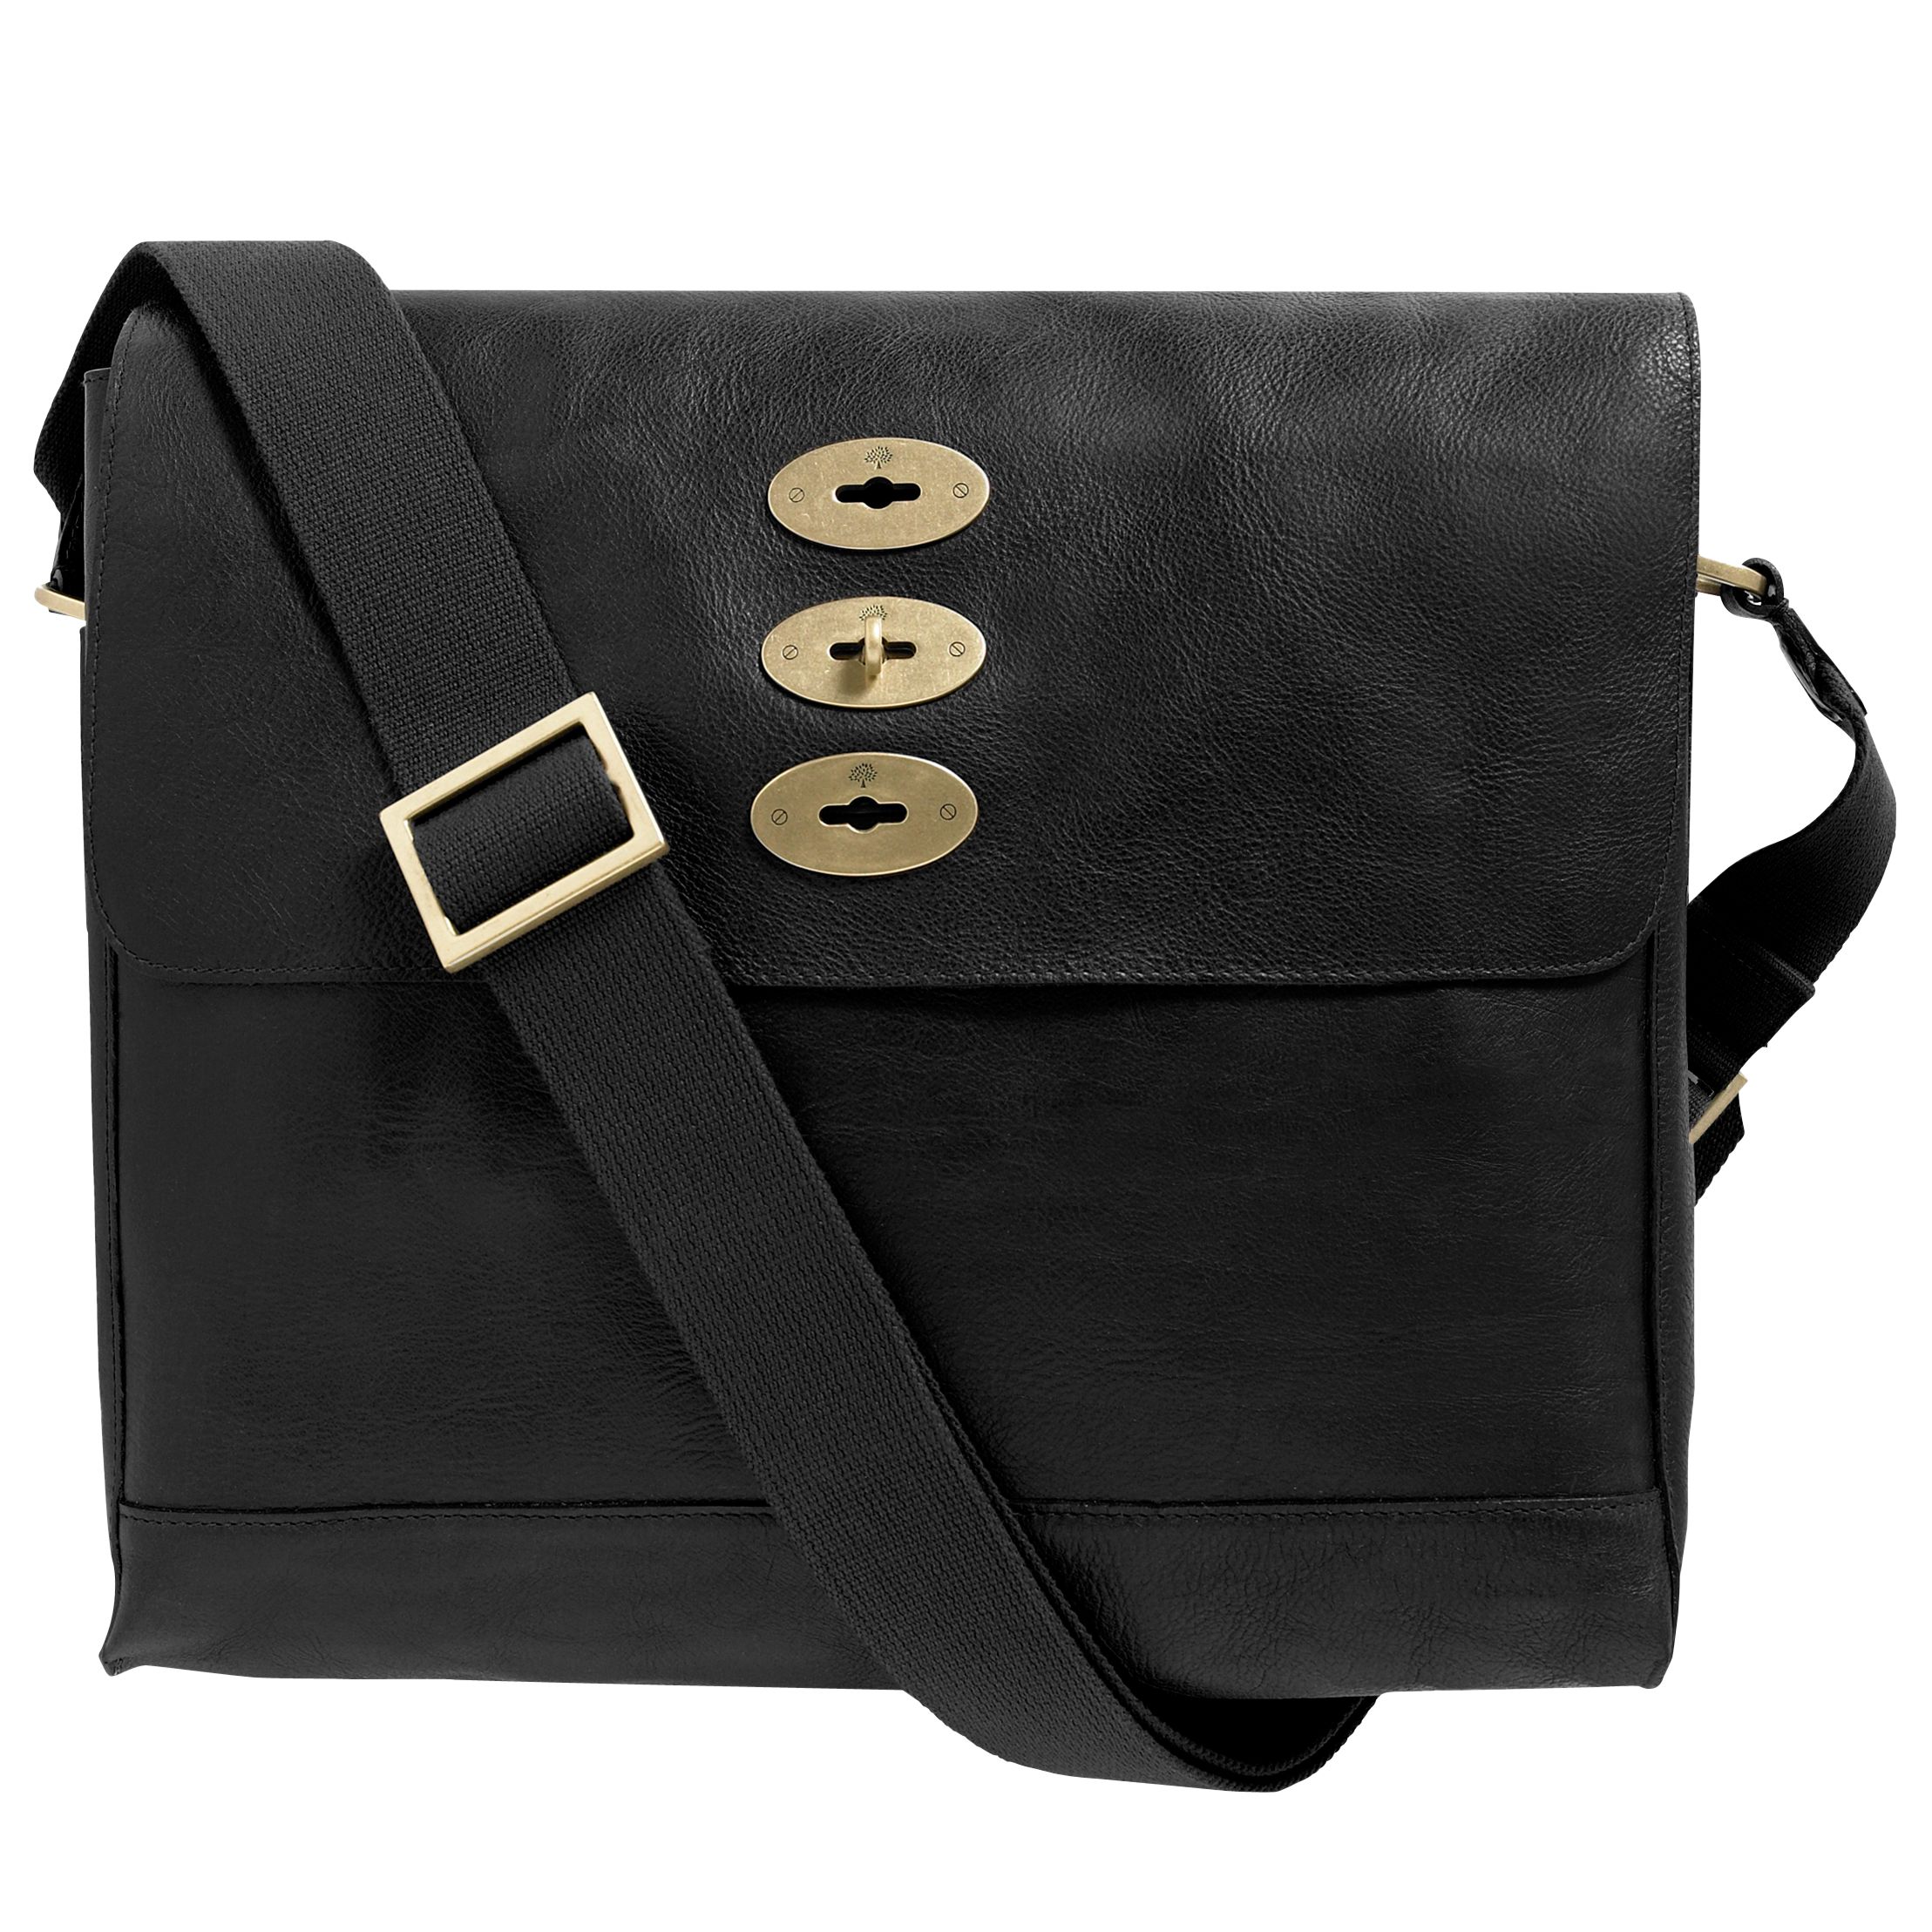 Mulberry Brynmore Natural Leather Messenger Bag, Black at JohnLewis